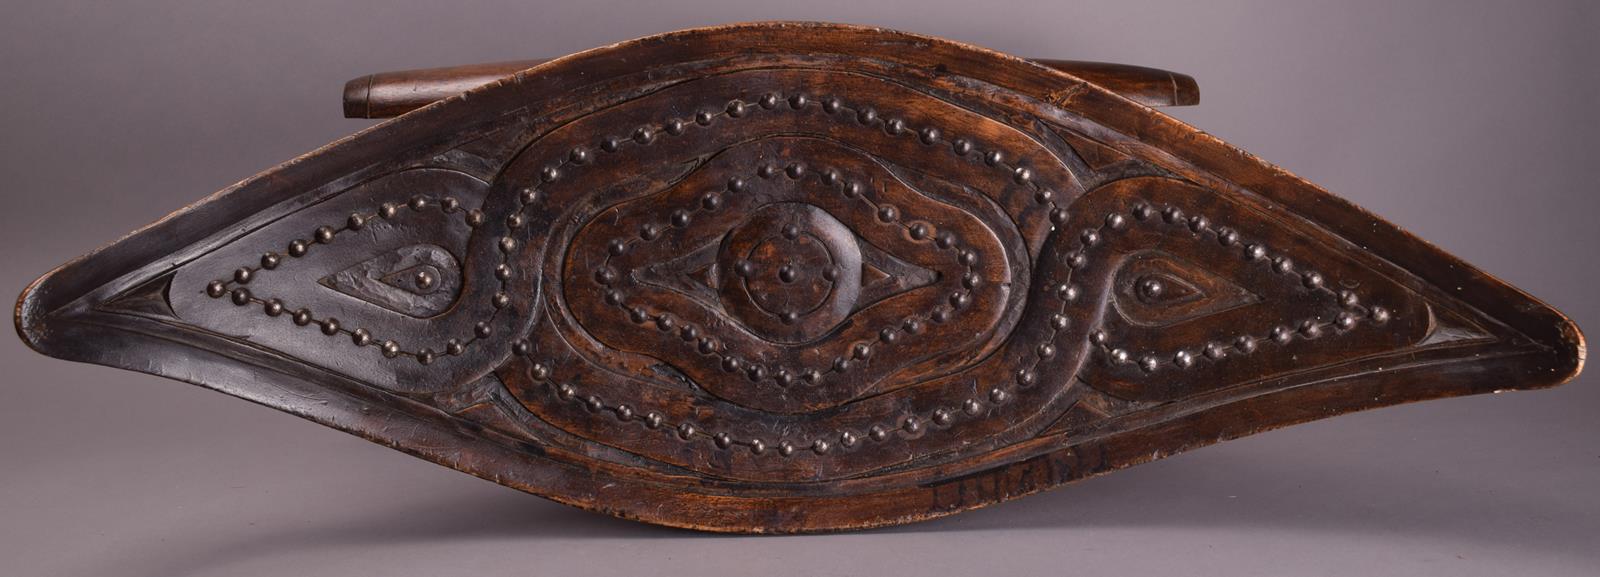 A Surinam Maroons stool South America wood, with metal stud decoration, with a curved eliptical - Image 4 of 4